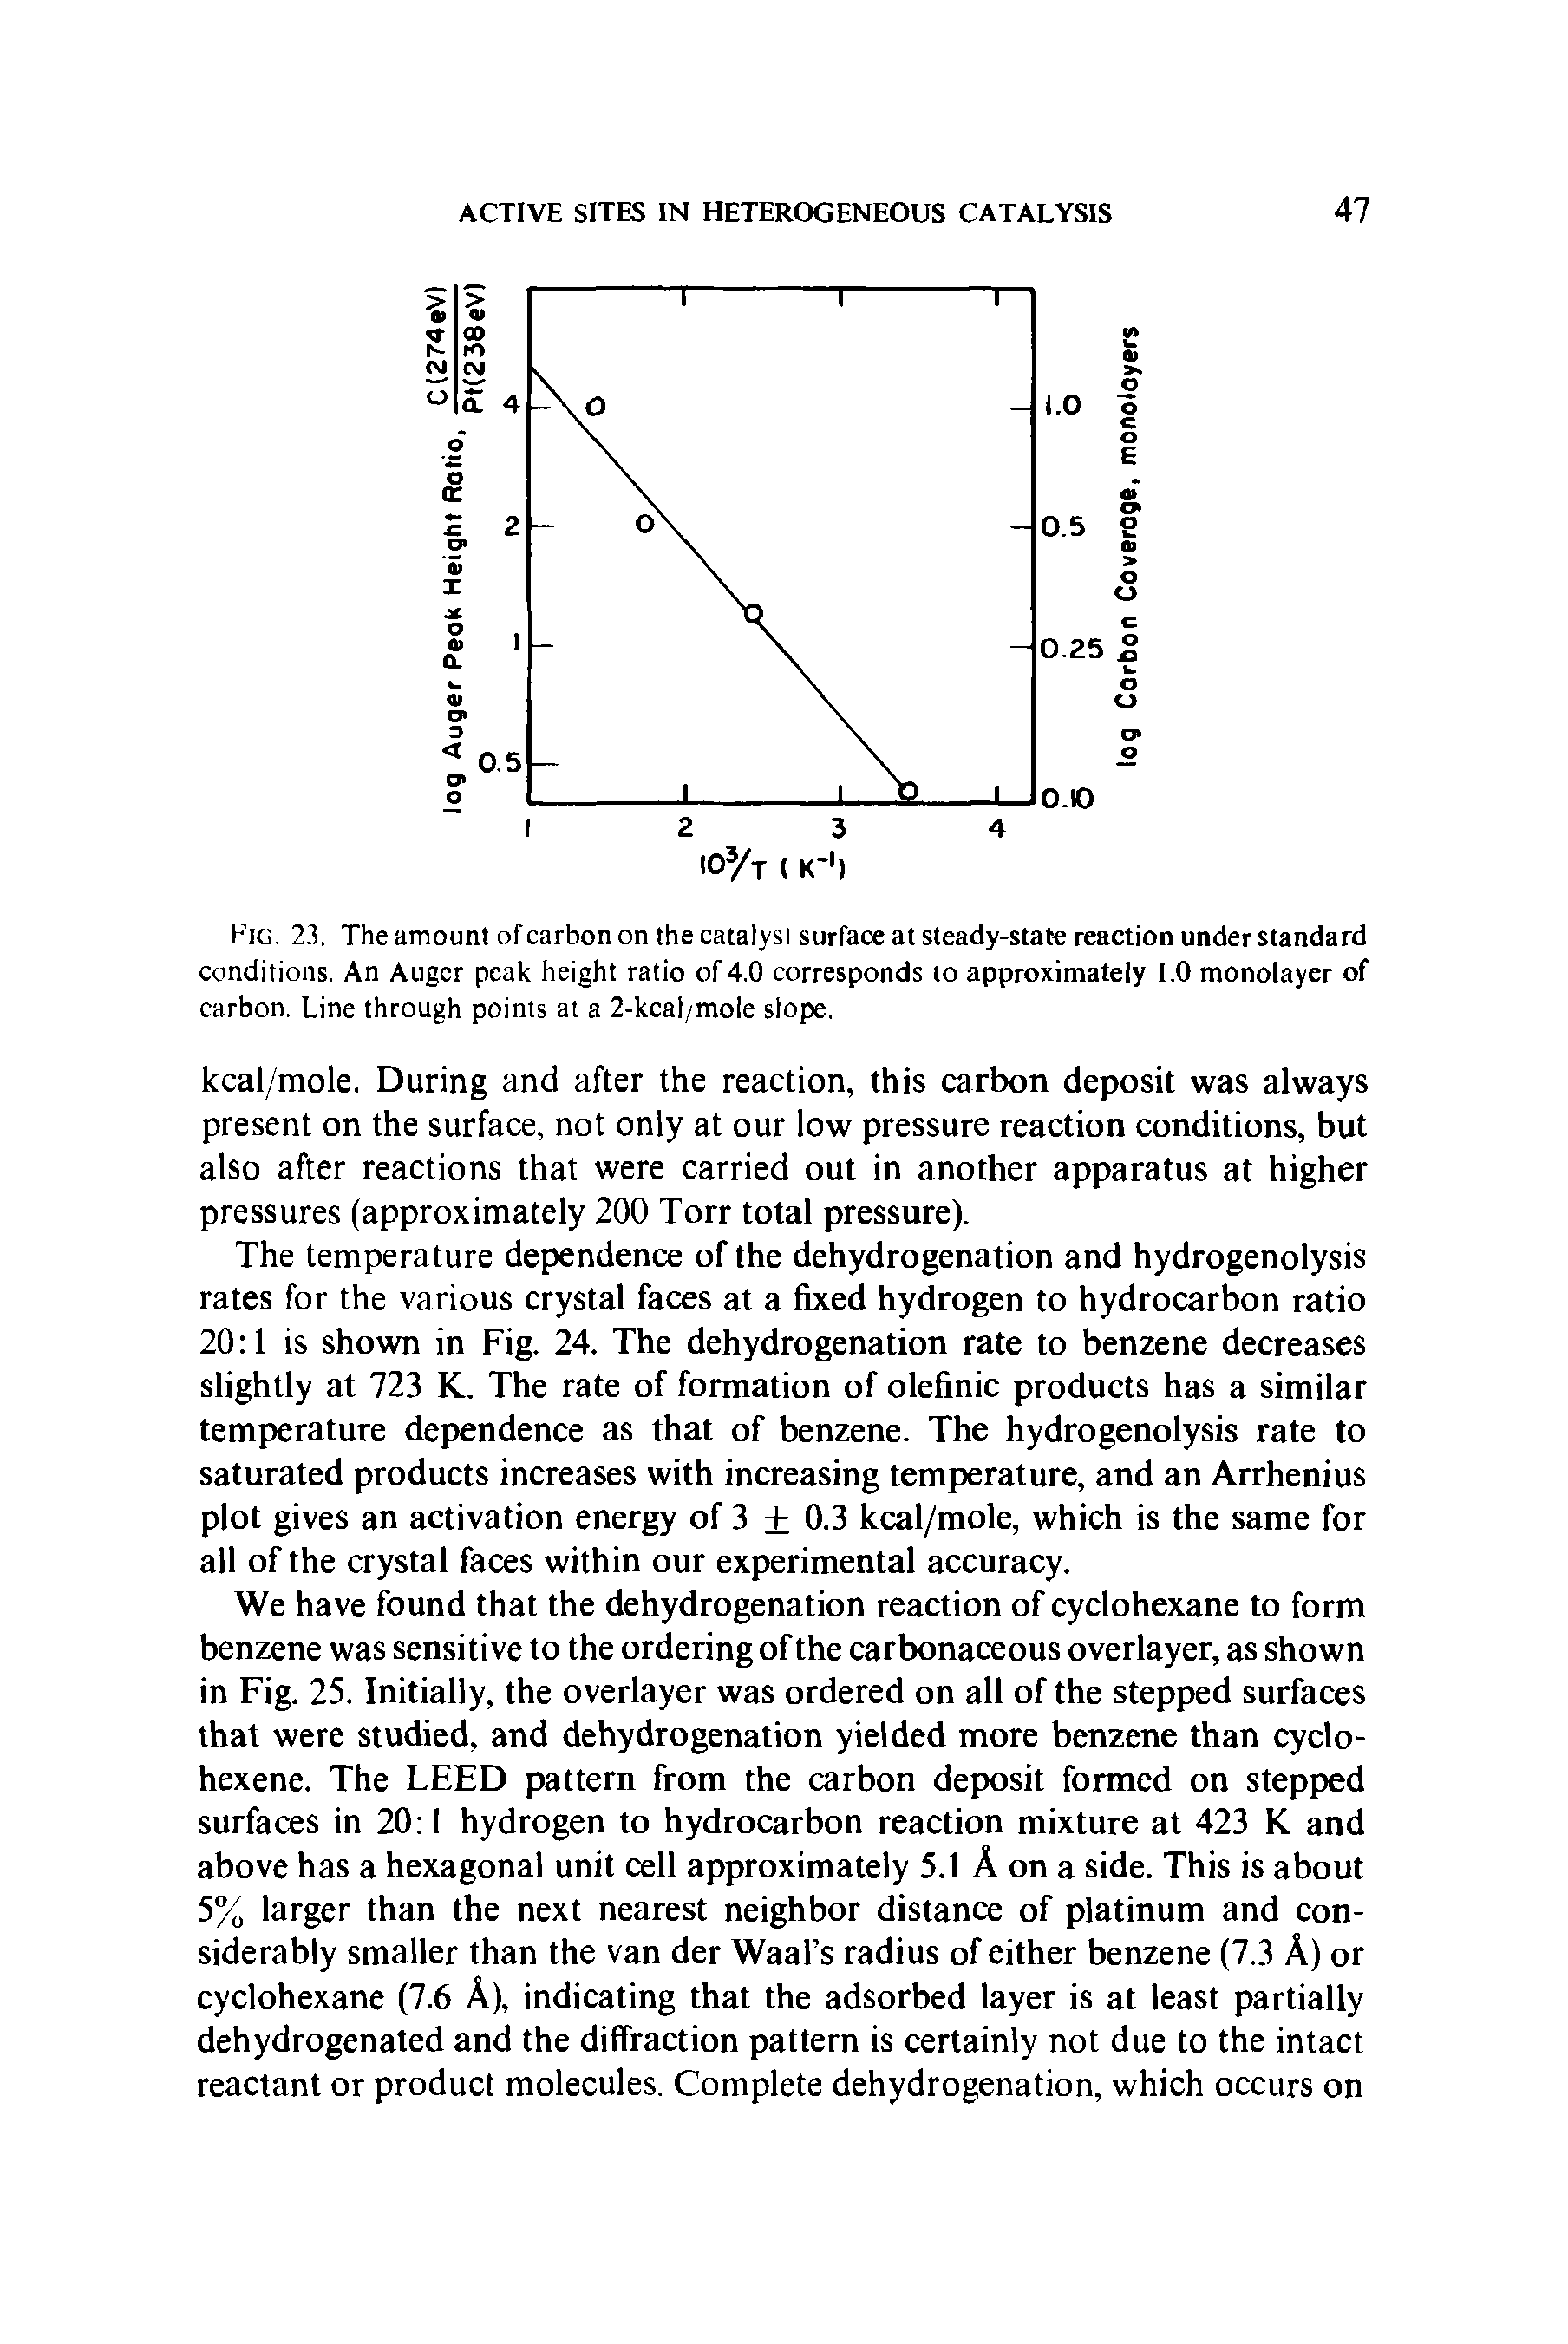 Fig. 23. The amount of carbon on the catalyst surface at steady-state reaction under standard conditions. An Auger peak height ratio of 4.0 corresponds to approximately 1.0 monolayer of carbon. Line through points at a 2-kcal/mole slope.